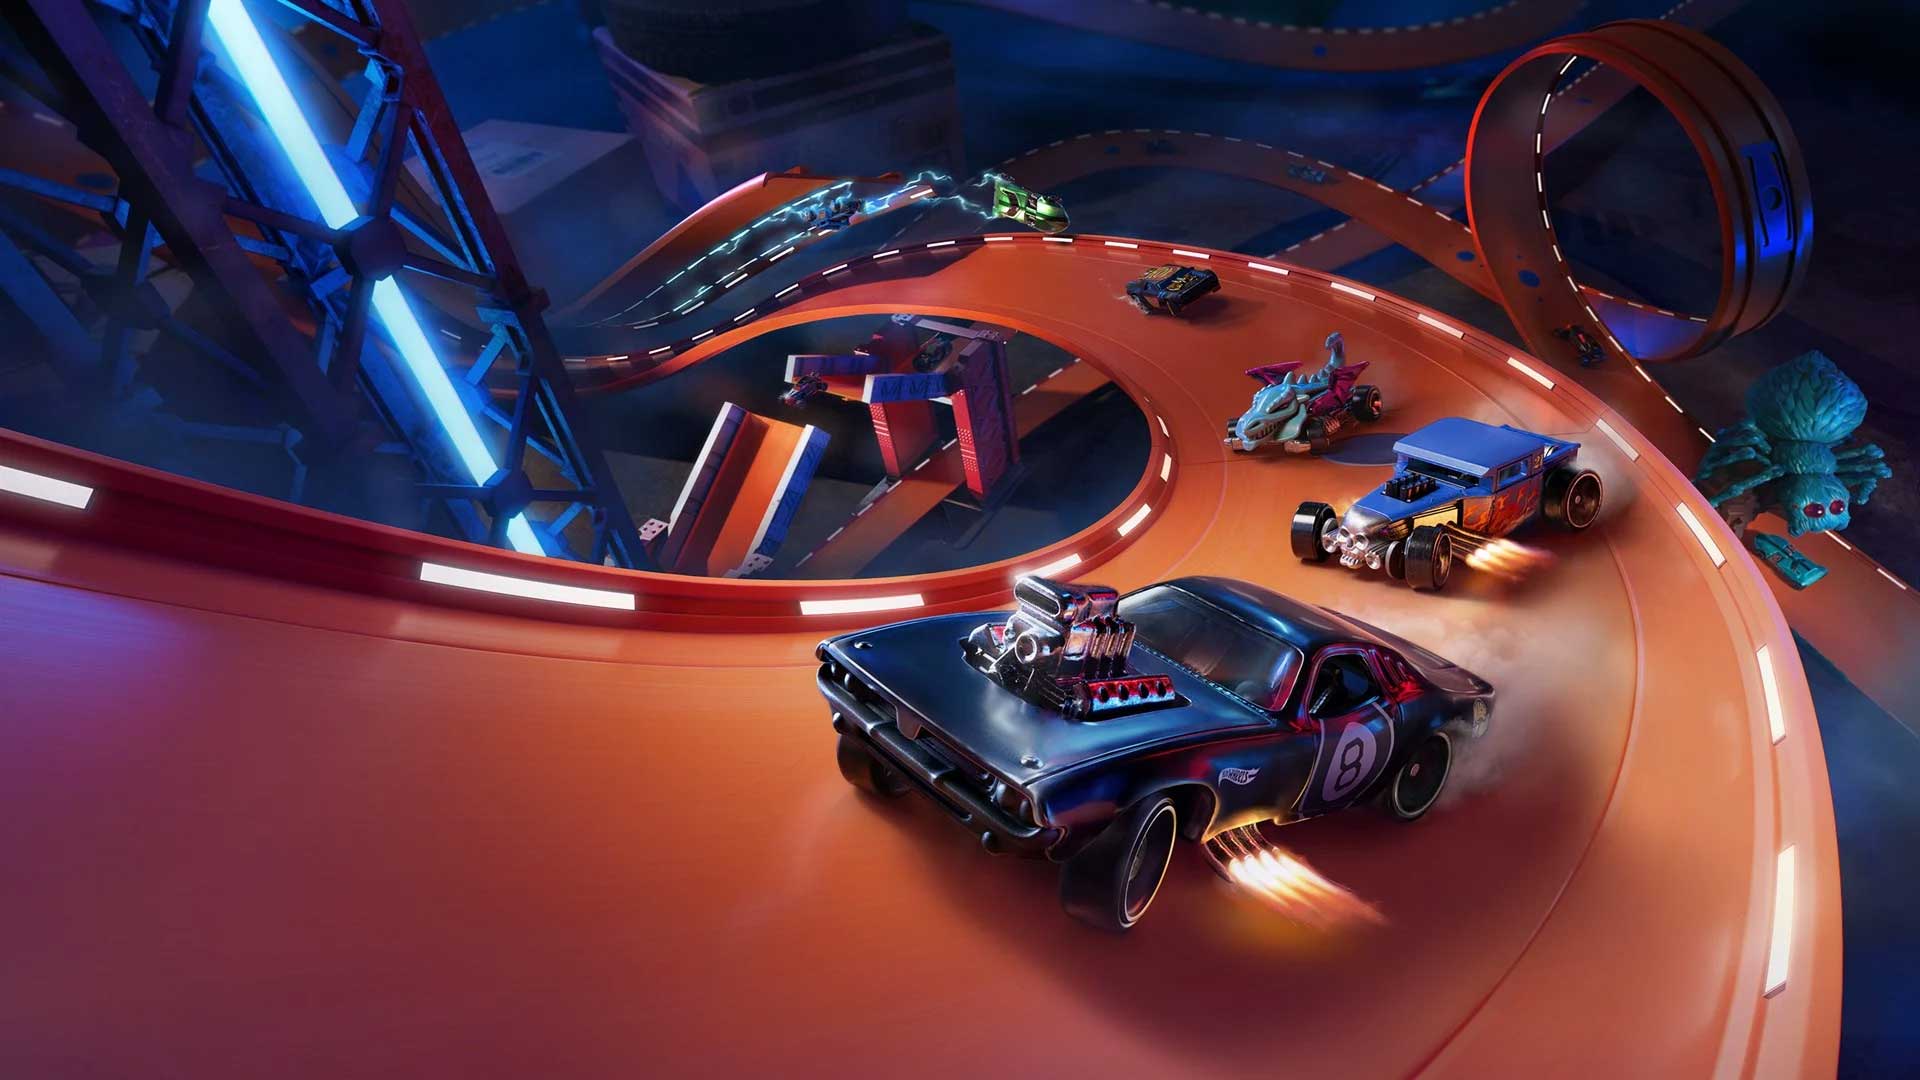 Hot Wheels Movie in the Works from J.J. Abrams and Warner Bros.